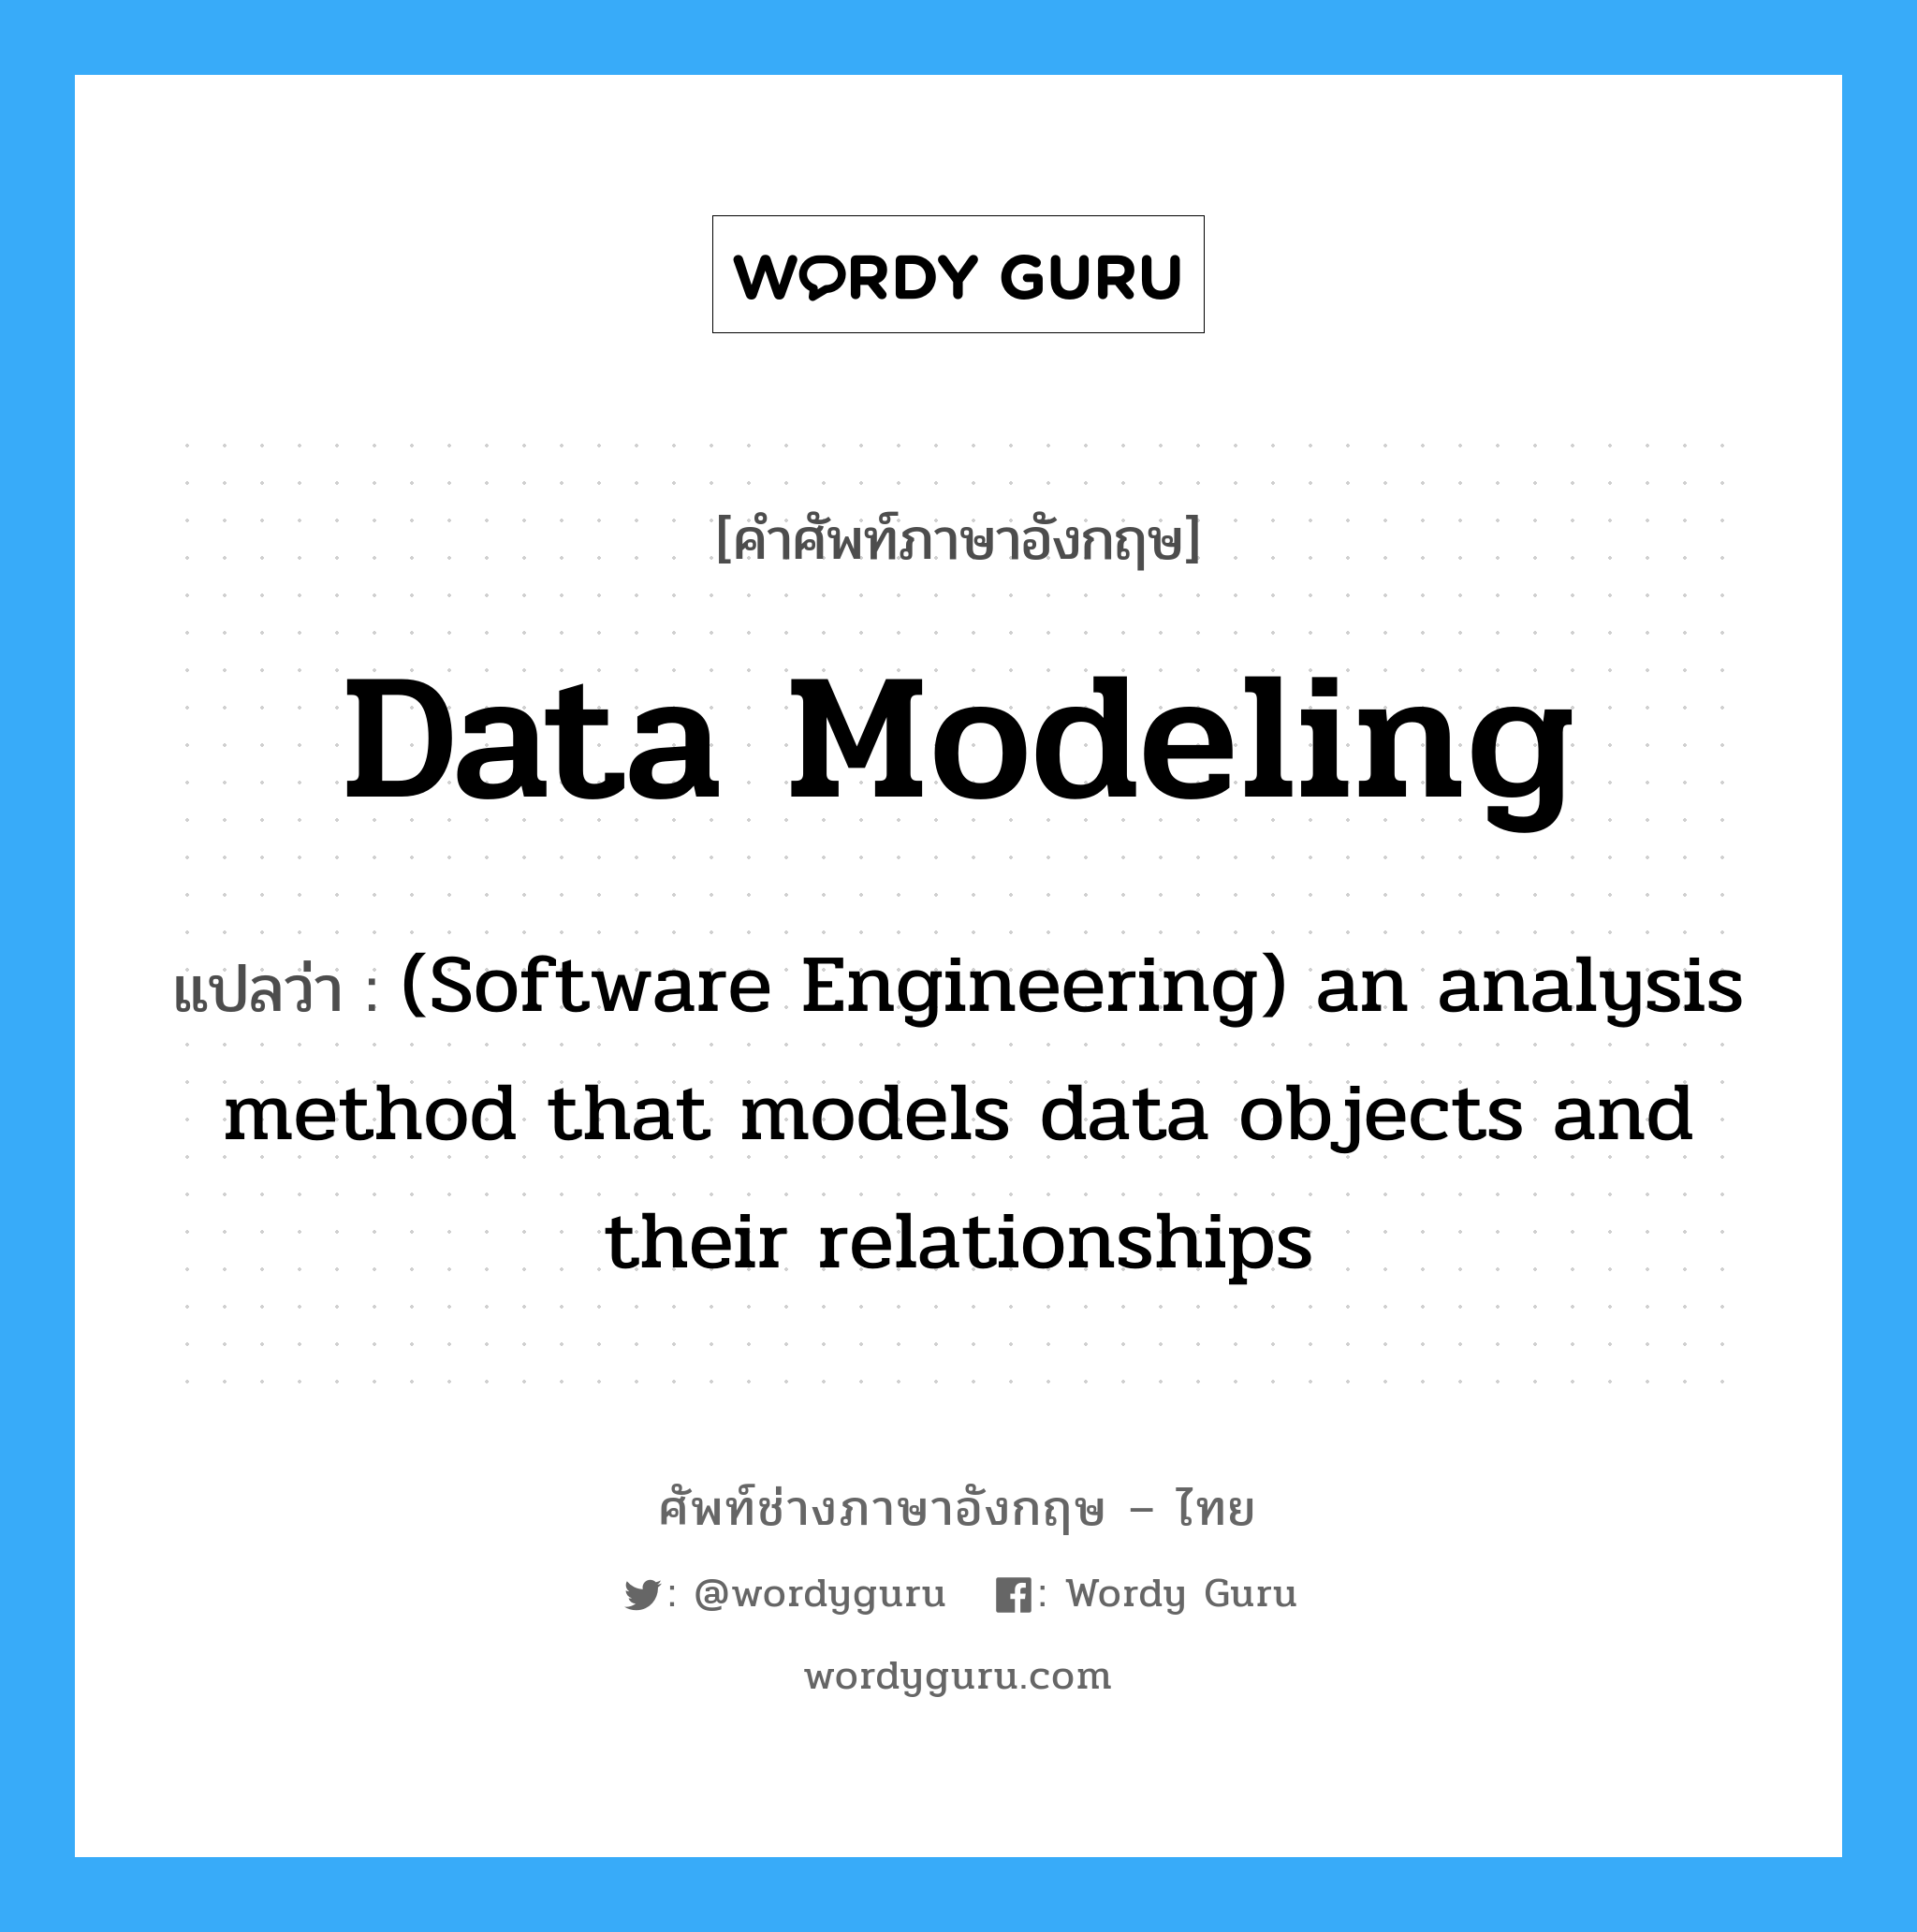 (Software Engineering) an analysis method that models data objects and their relationships ภาษาอังกฤษ?, คำศัพท์ช่างภาษาอังกฤษ - ไทย (Software Engineering) an analysis method that models data objects and their relationships คำศัพท์ภาษาอังกฤษ (Software Engineering) an analysis method that models data objects and their relationships แปลว่า Data modeling